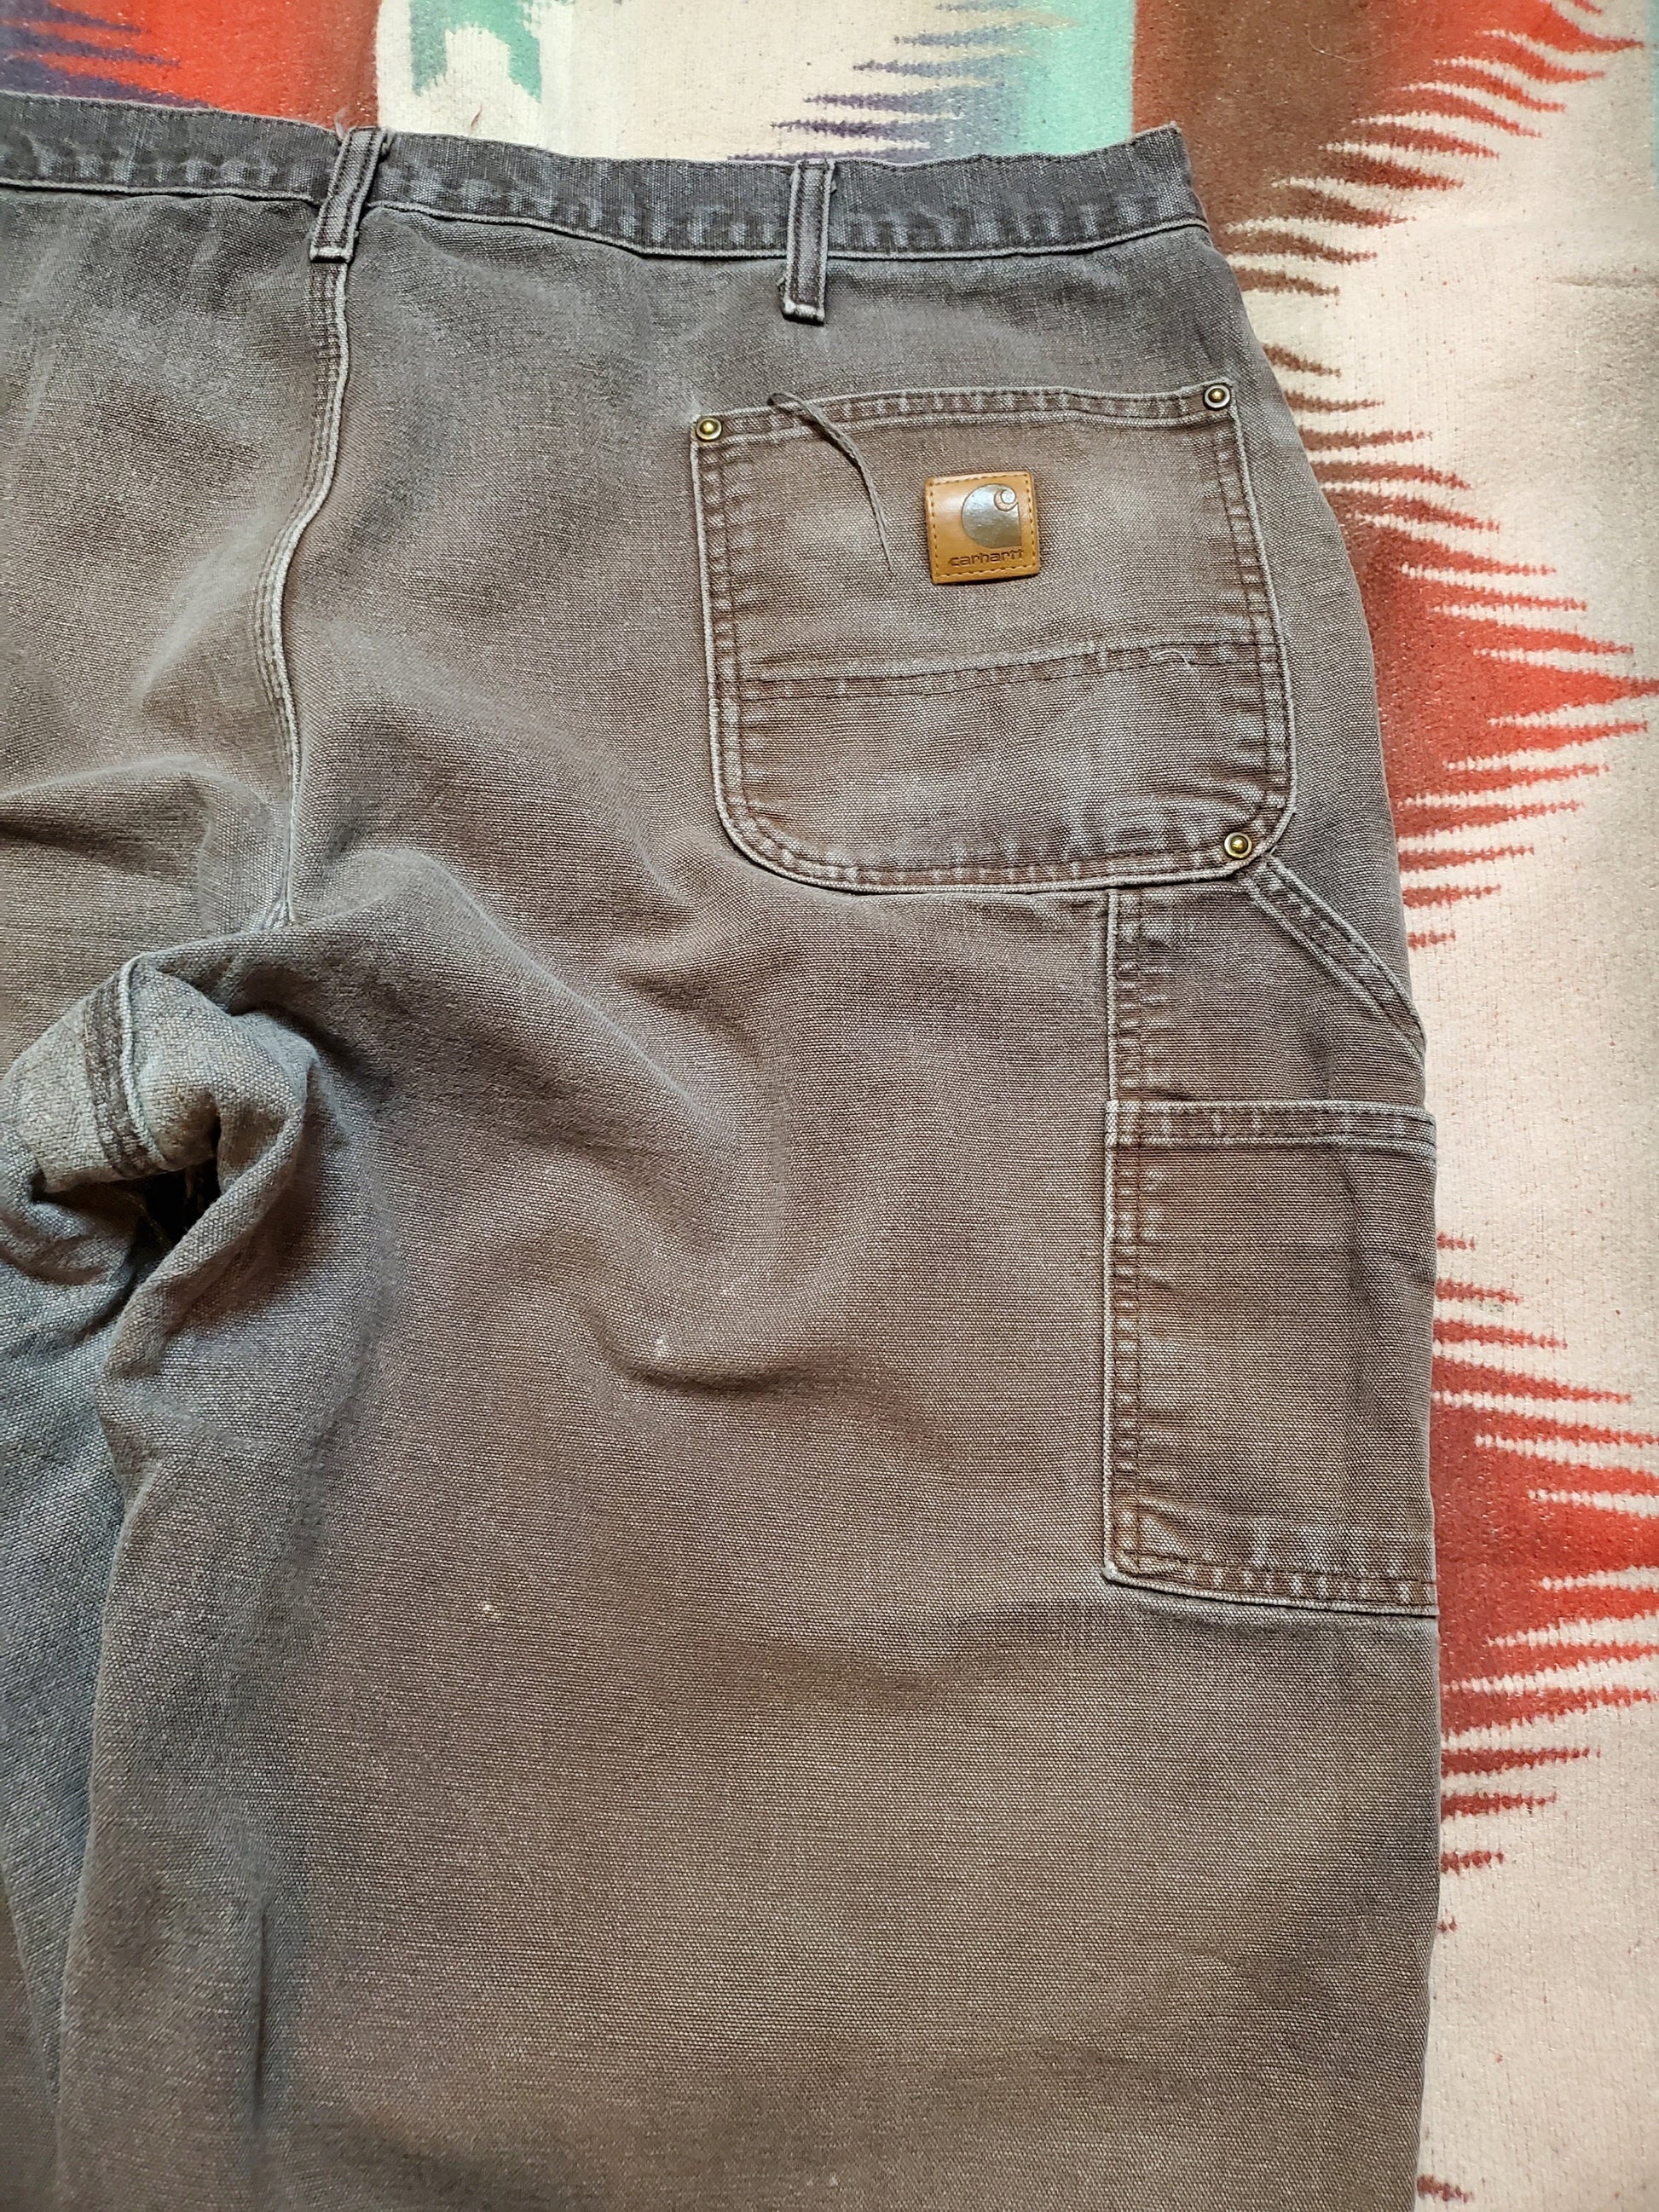 2000s Faded Brown Carhartt Double Knee Work Pants Size 41x29.5